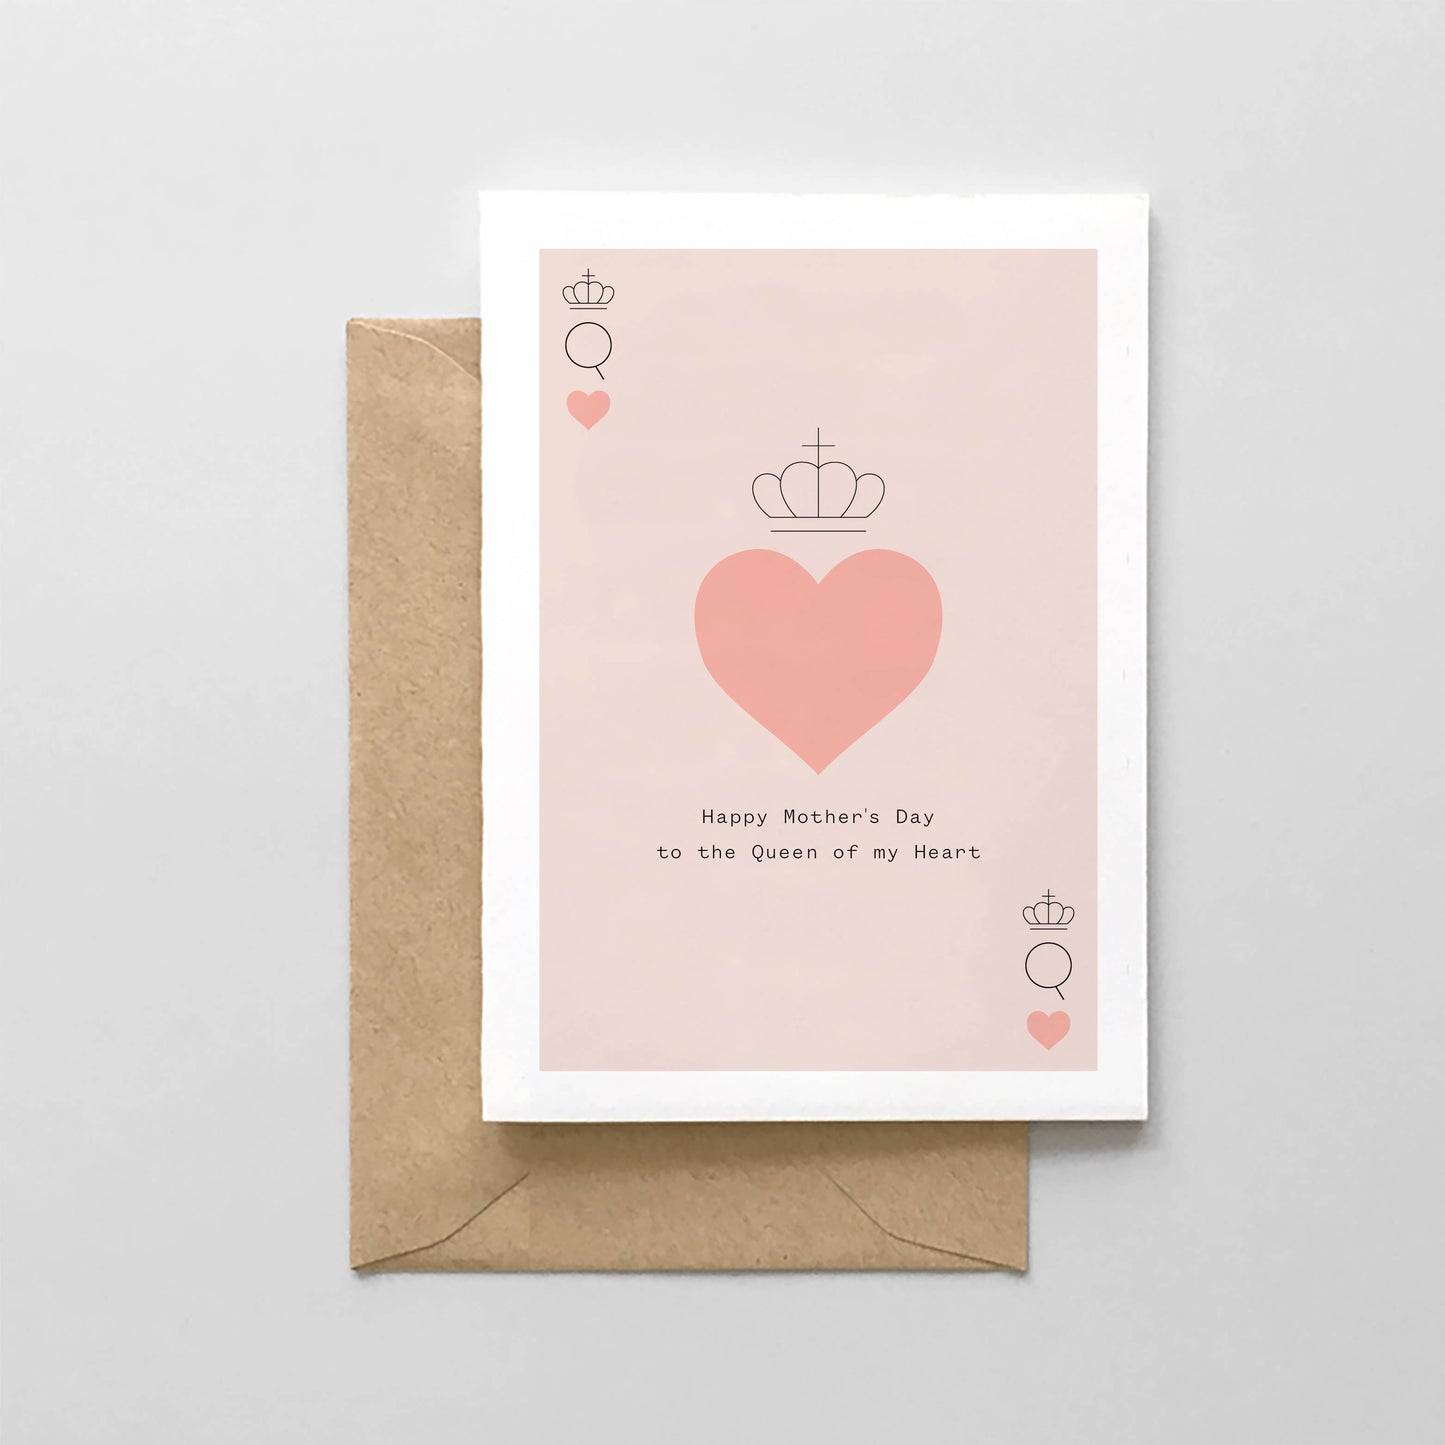 Spaghetti & Meatballs - Queen of my Heart - Mother's Day Card